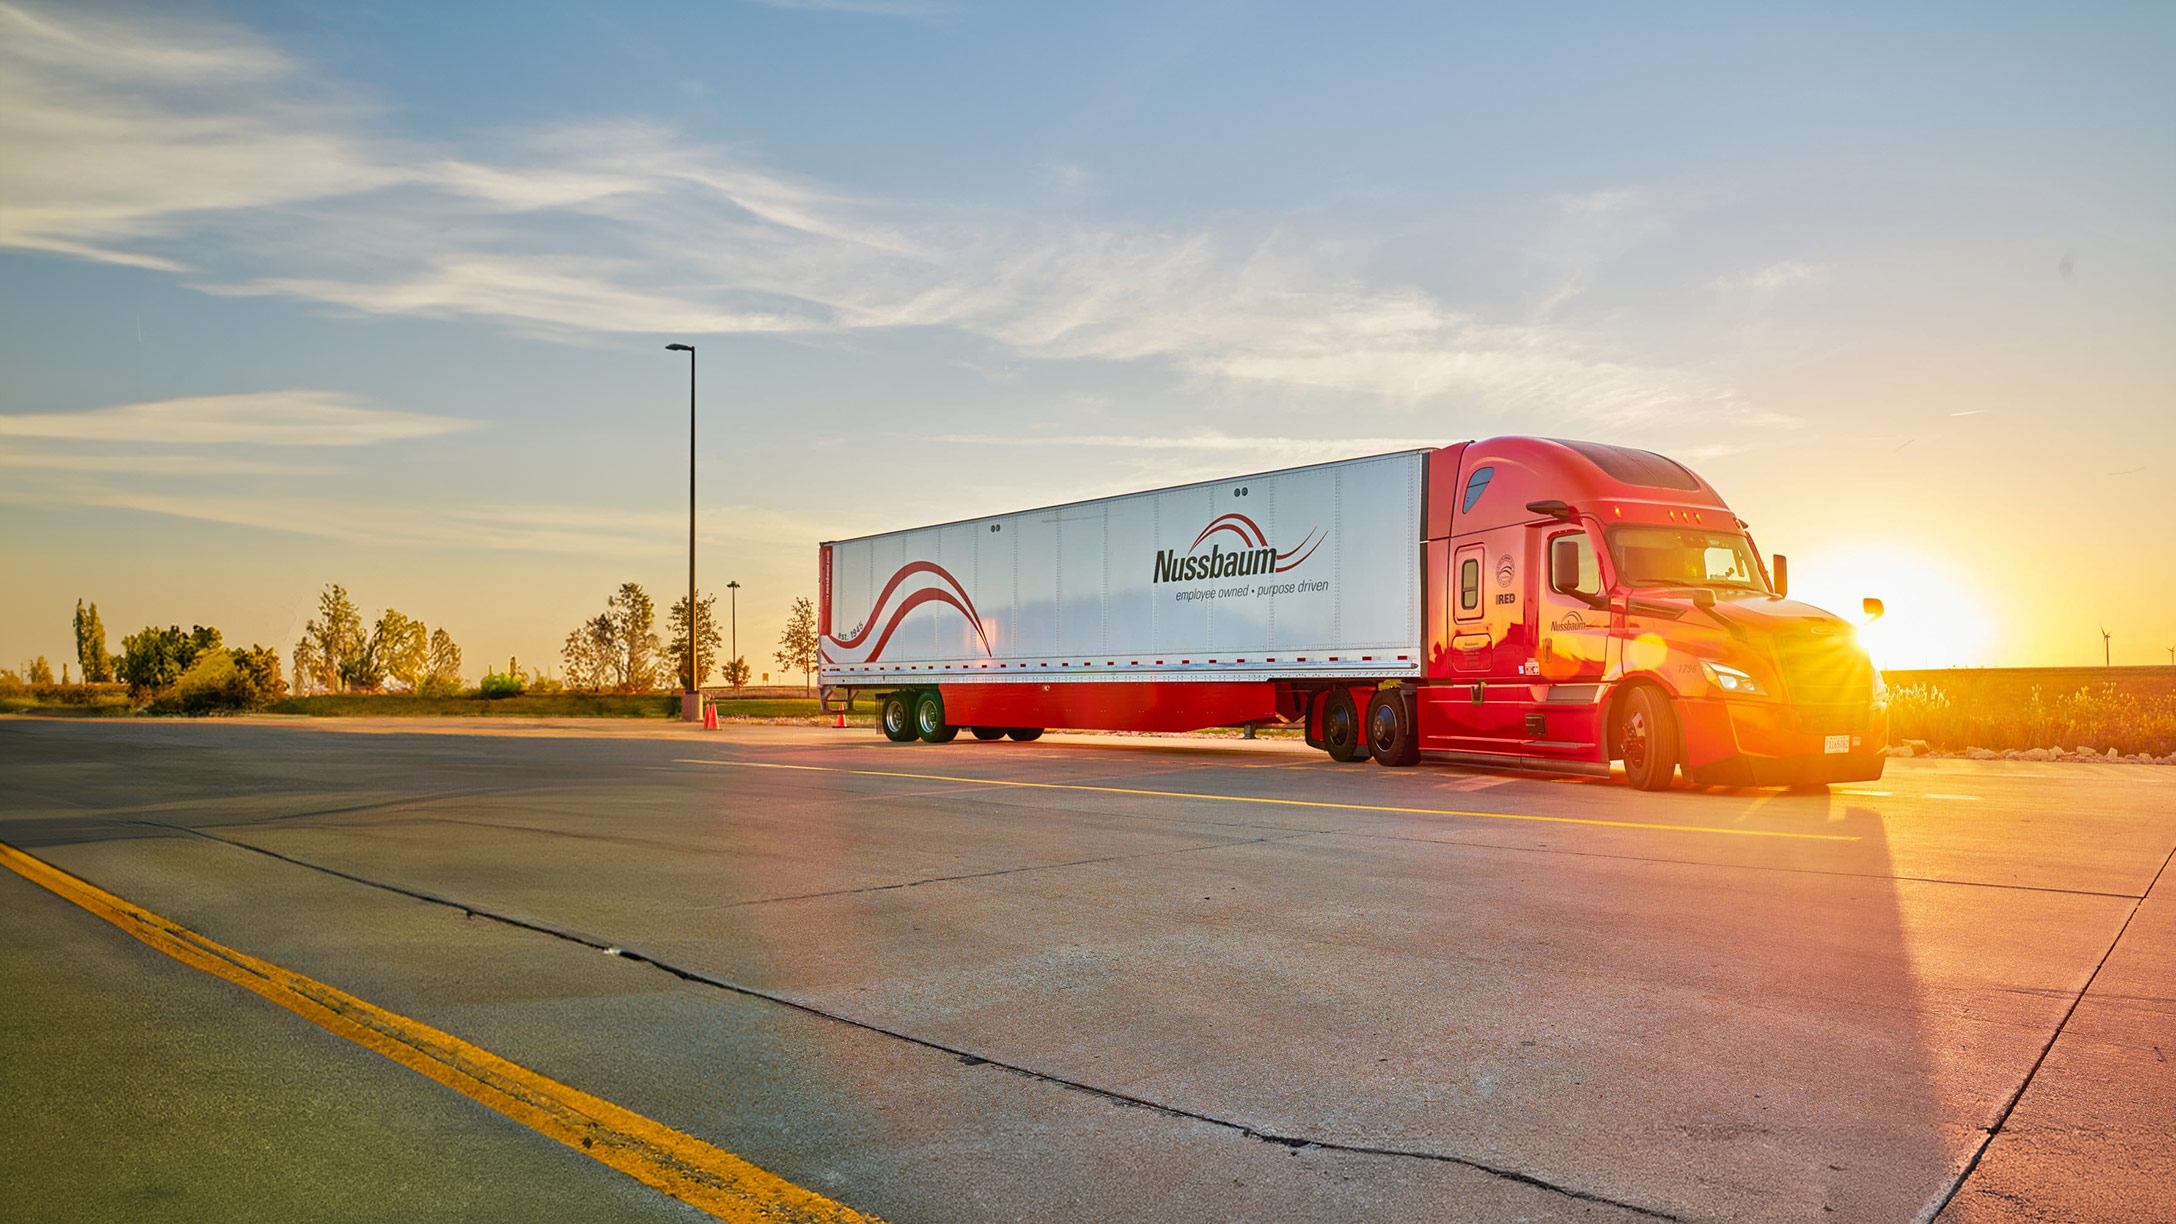 image of a truck during sunset